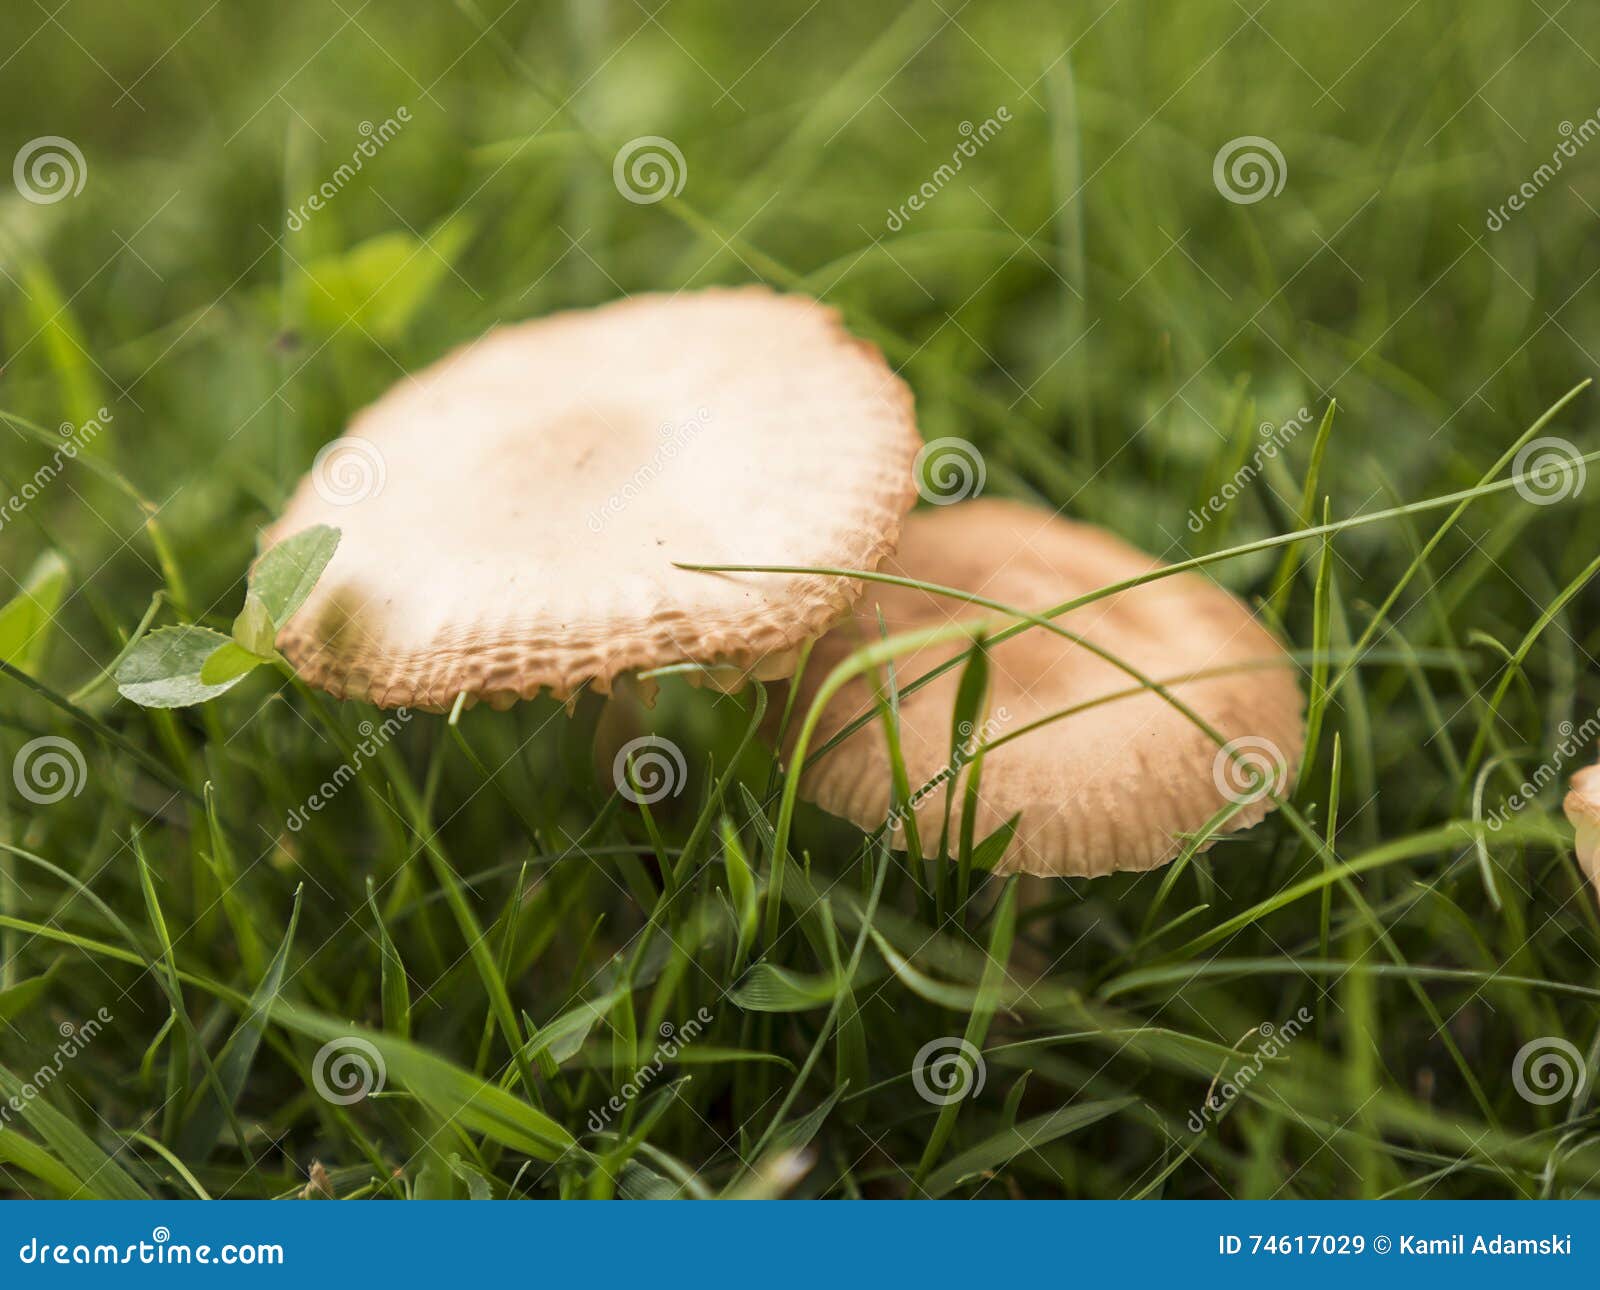 Mushrooms Growing In Middle Grass Stock Image Image Of Meadows